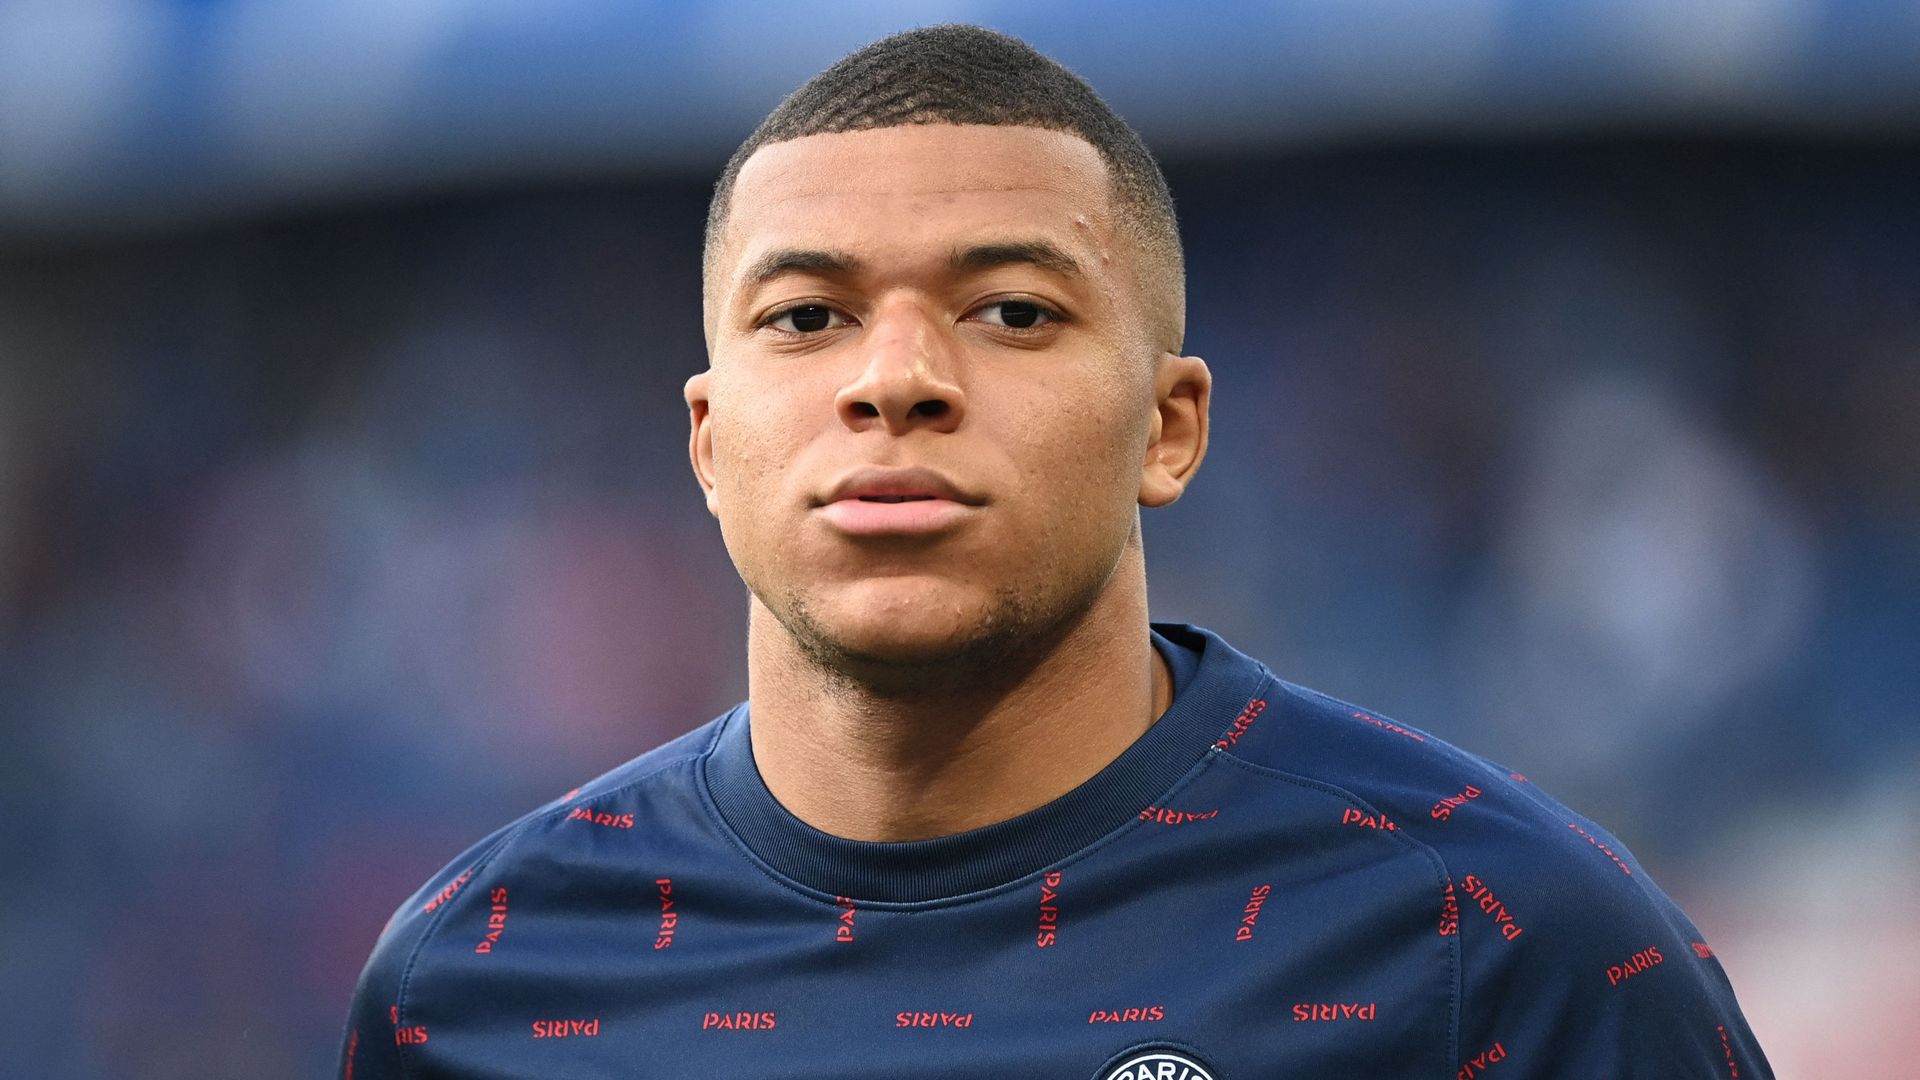 Kylian Mbappe Told He Won’t Play One More Minute For PSG